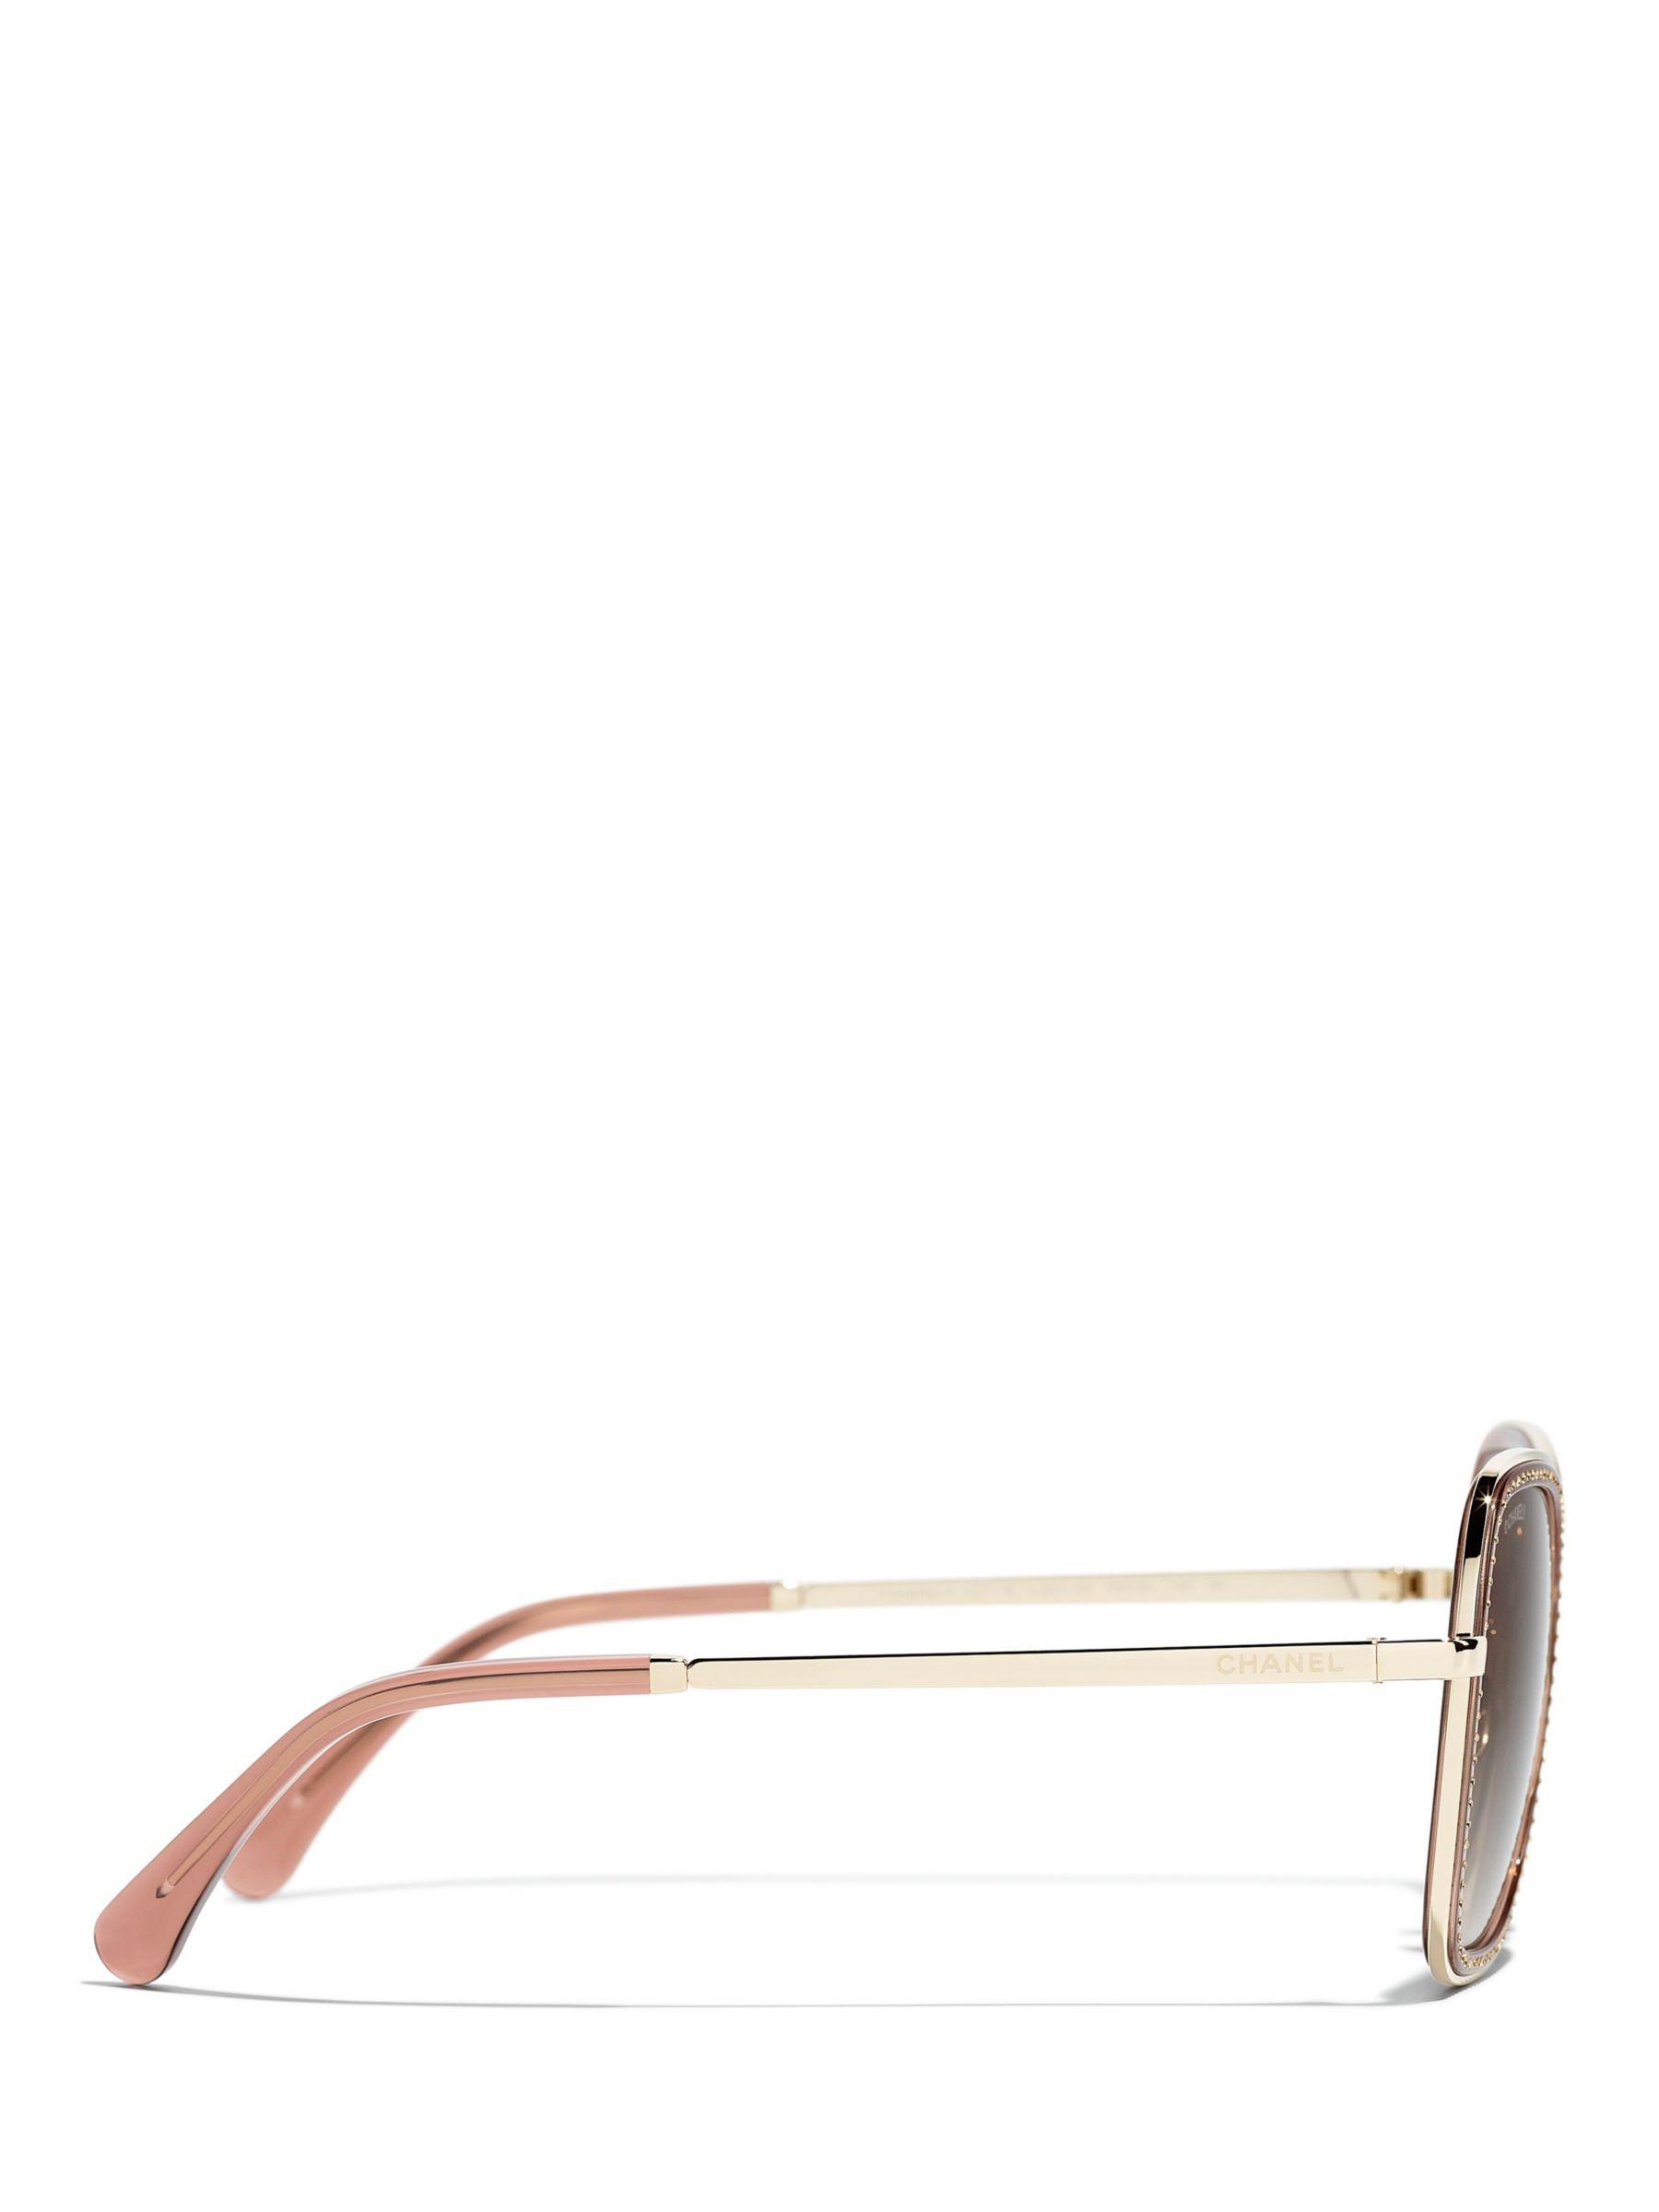 CHANEL Oval Sunglasses CH4242 Pale Gold/Brown Gradient at John Lewis &  Partners